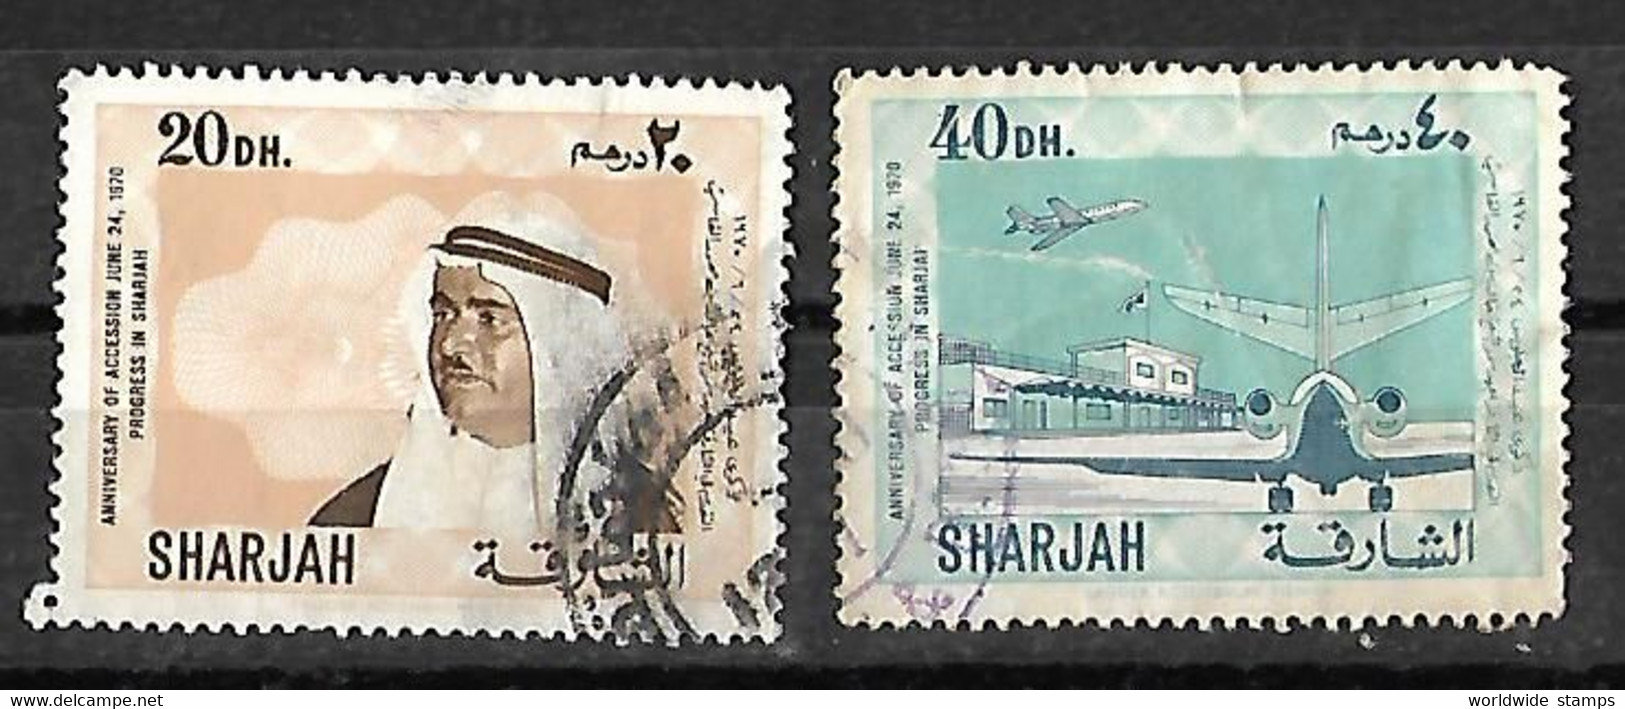 UAE Sharjah 1970 Anniversary Of Accession Postal Used Stamps Value 40 Dh, 20 Dh Used - Sharjah